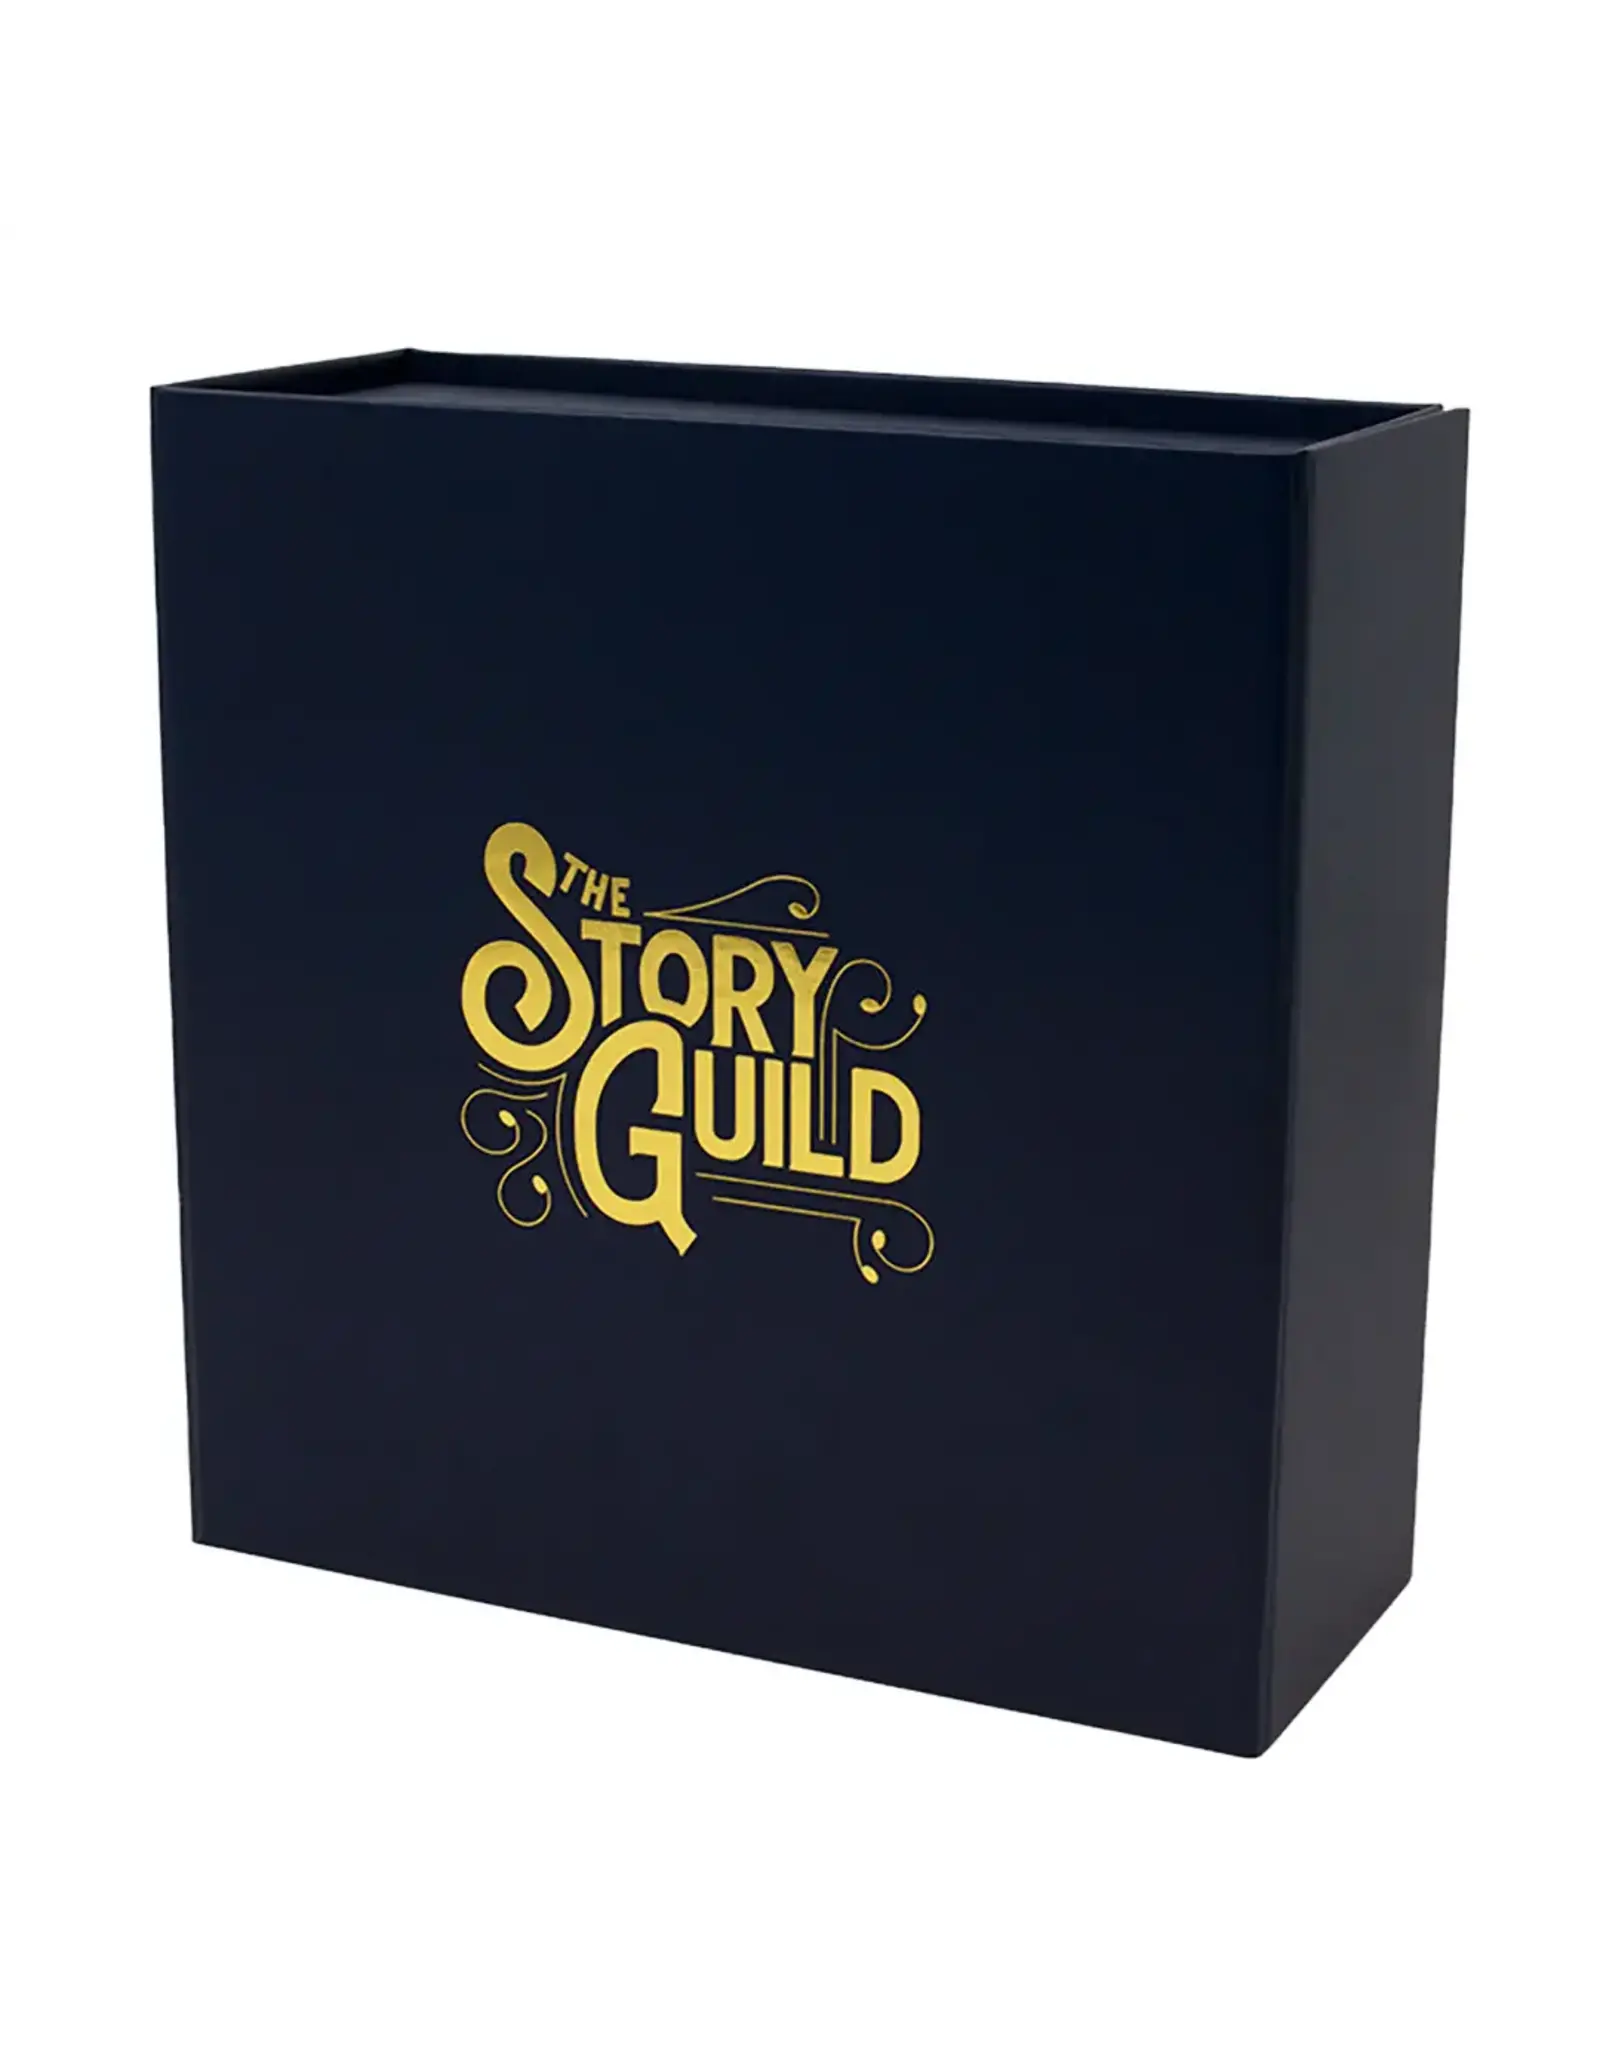 The Story Guild Puzzle - Precious in His Sight (500 Piece)